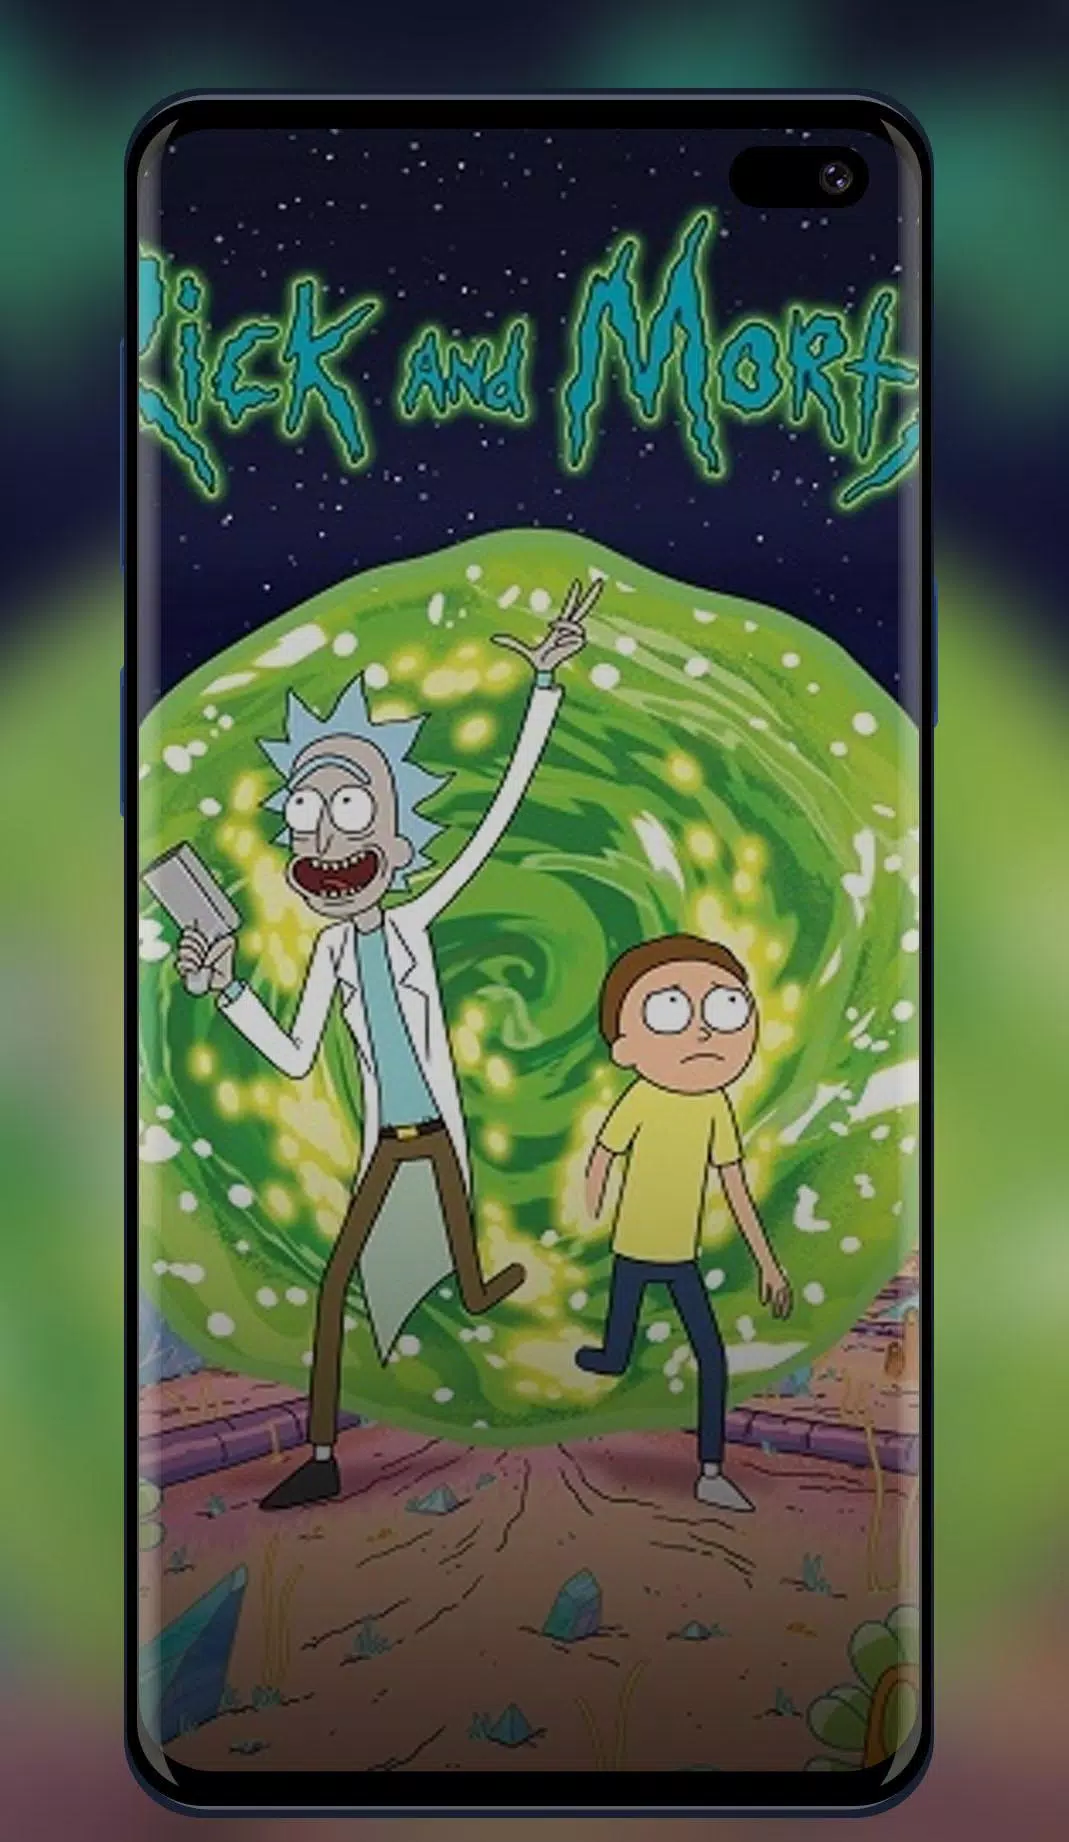 Rick and morty live HD wallpapers